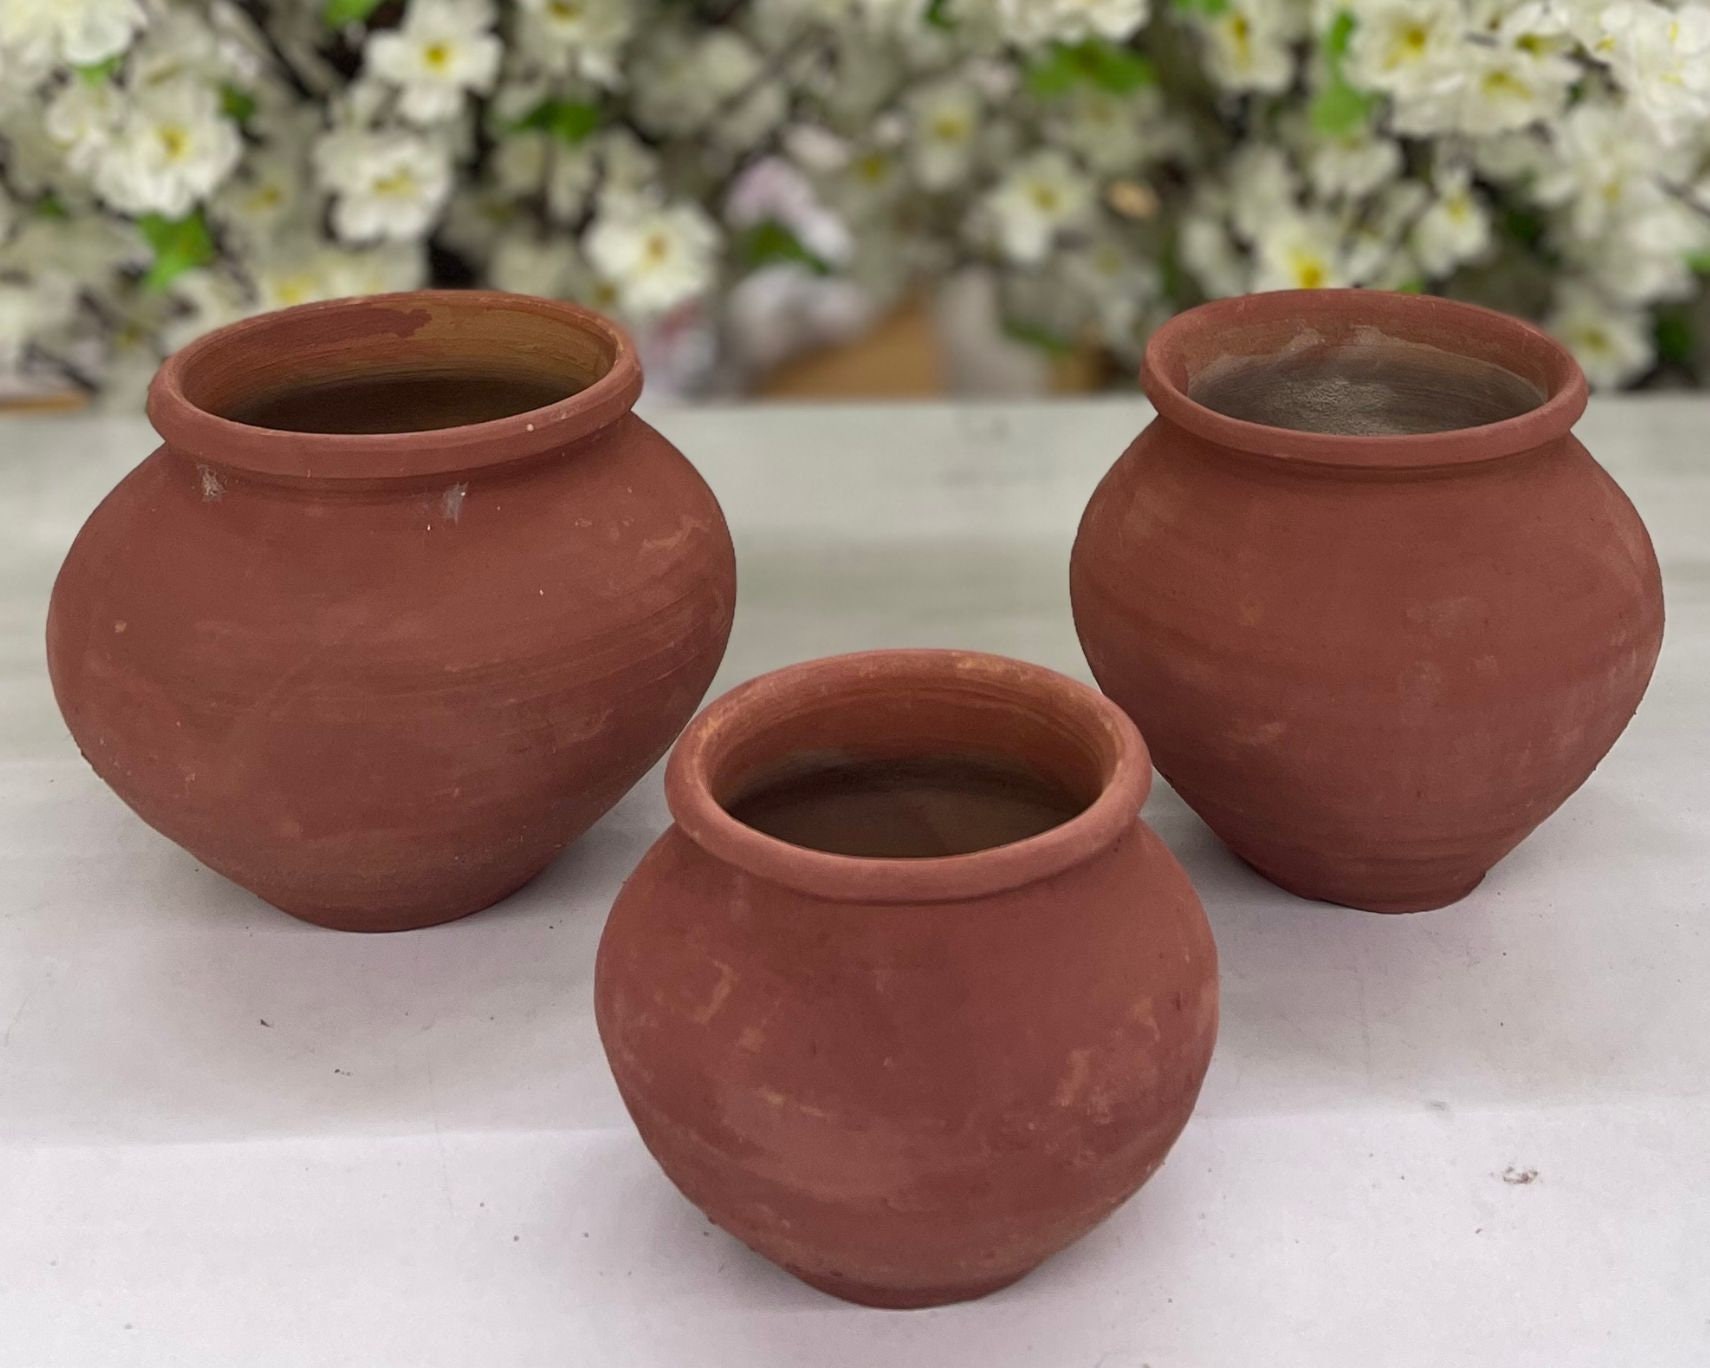 Terracotta / Clay Cooking and Serving Pot. Hand Made, Unglazed